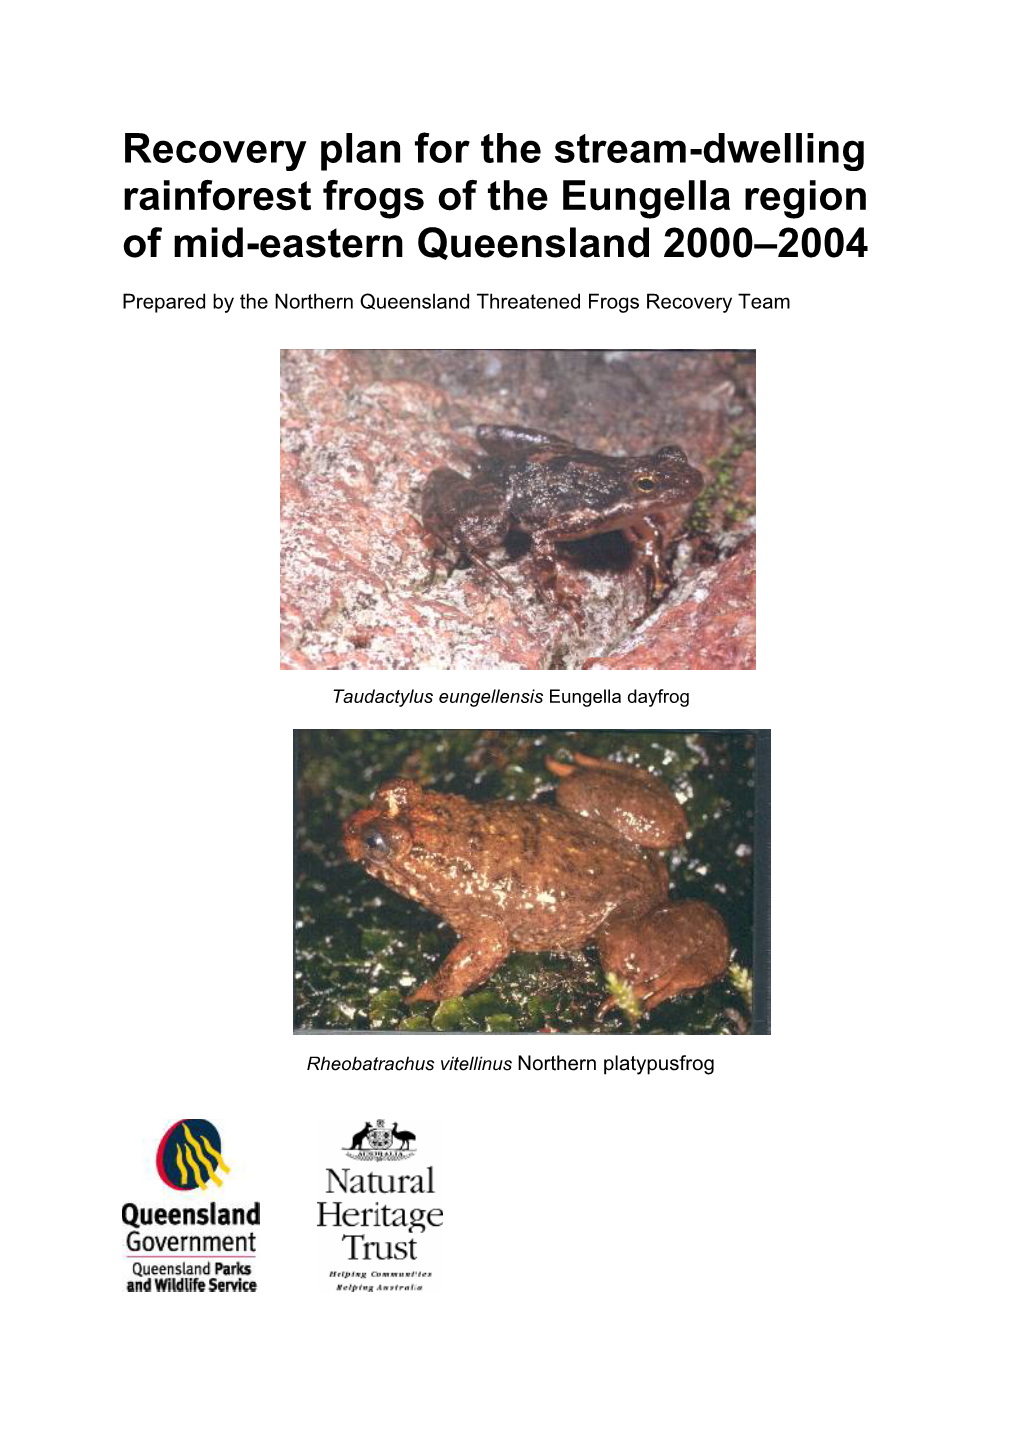 Recovery Plan for the Stream-Dwelling Rainforest Frogs of the Eungella Region of Mid-Eastern Queensland 2000–2004